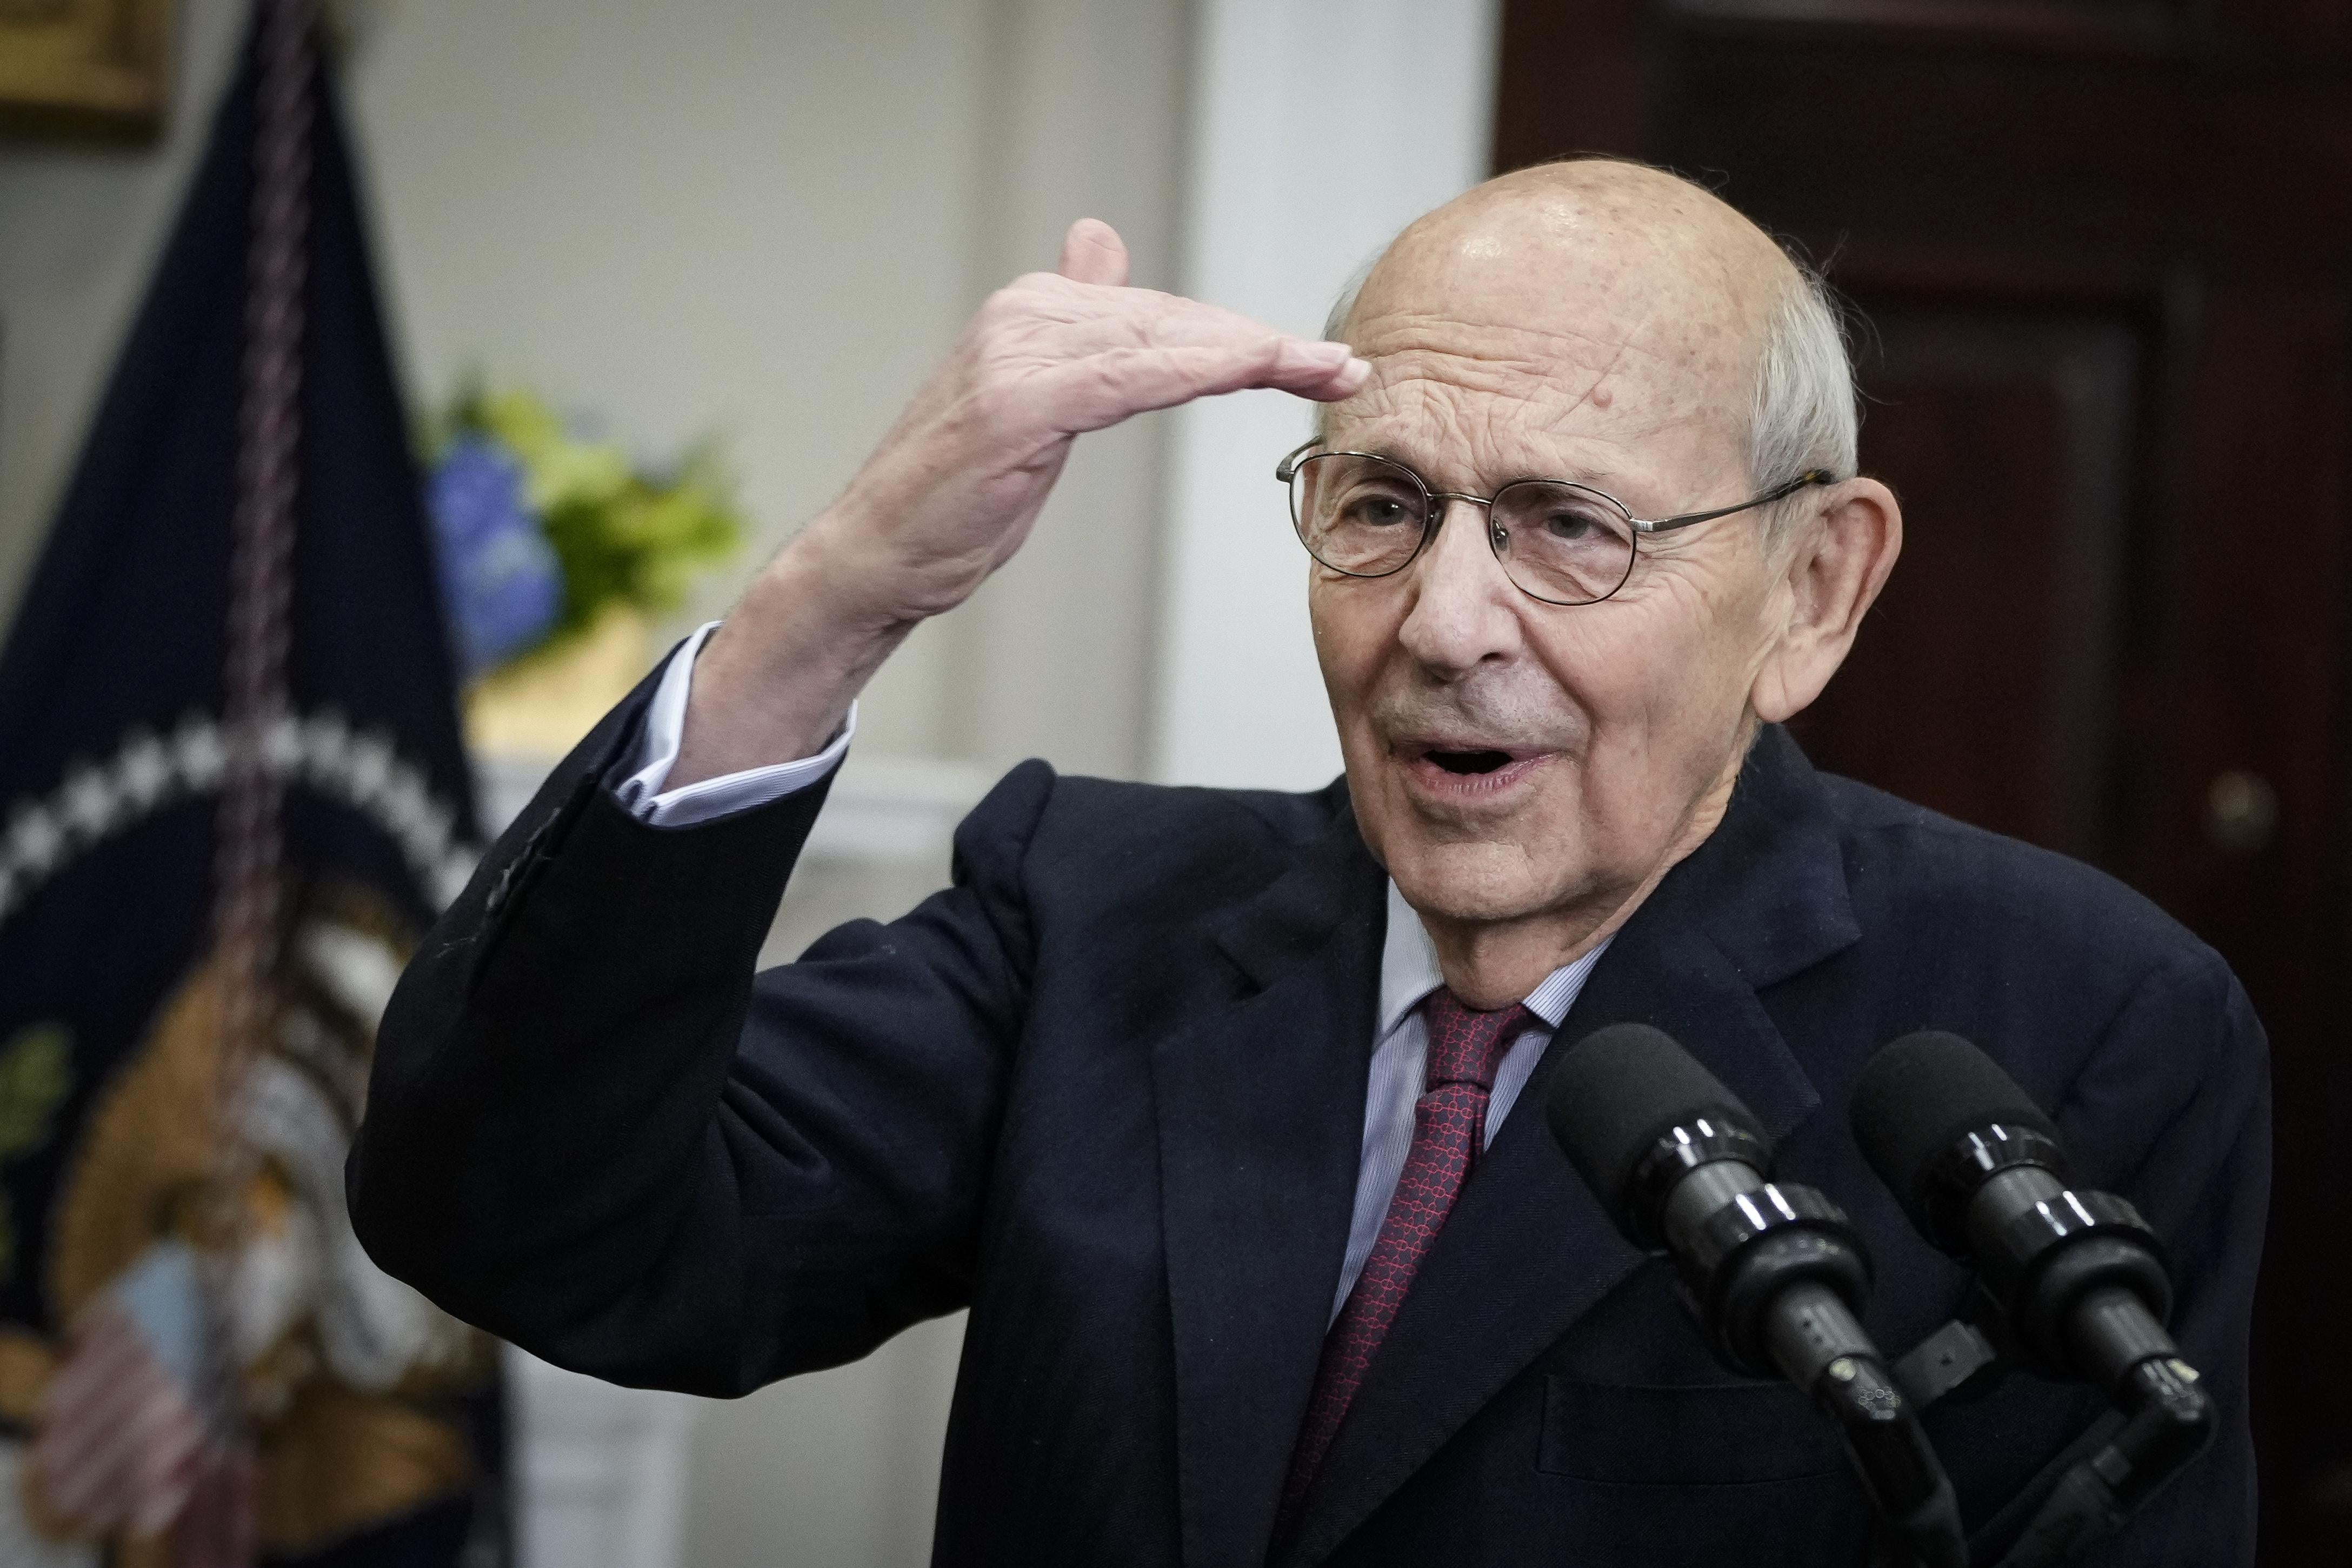 Breyer in a suit gestures towards his head with his right hand.